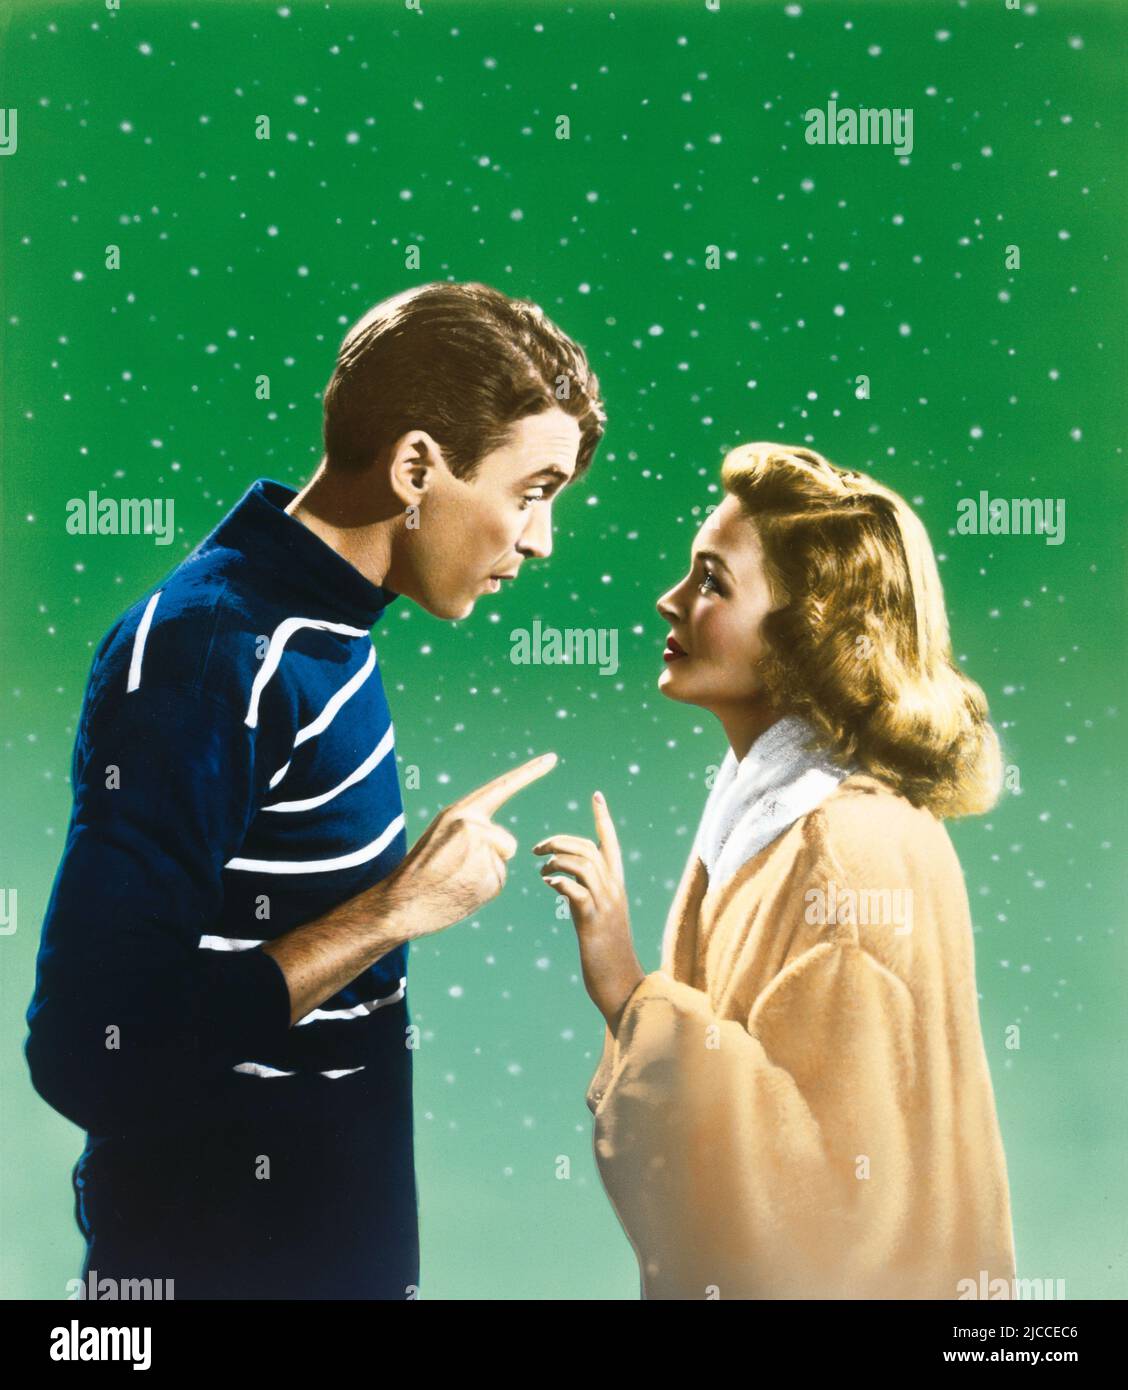 JAMES STEWART and DONNA REED in IT'S A WONDERFUL LIFE (1946), directed by FRANK CAPRA. Credit: RKO / Album Stock Photo